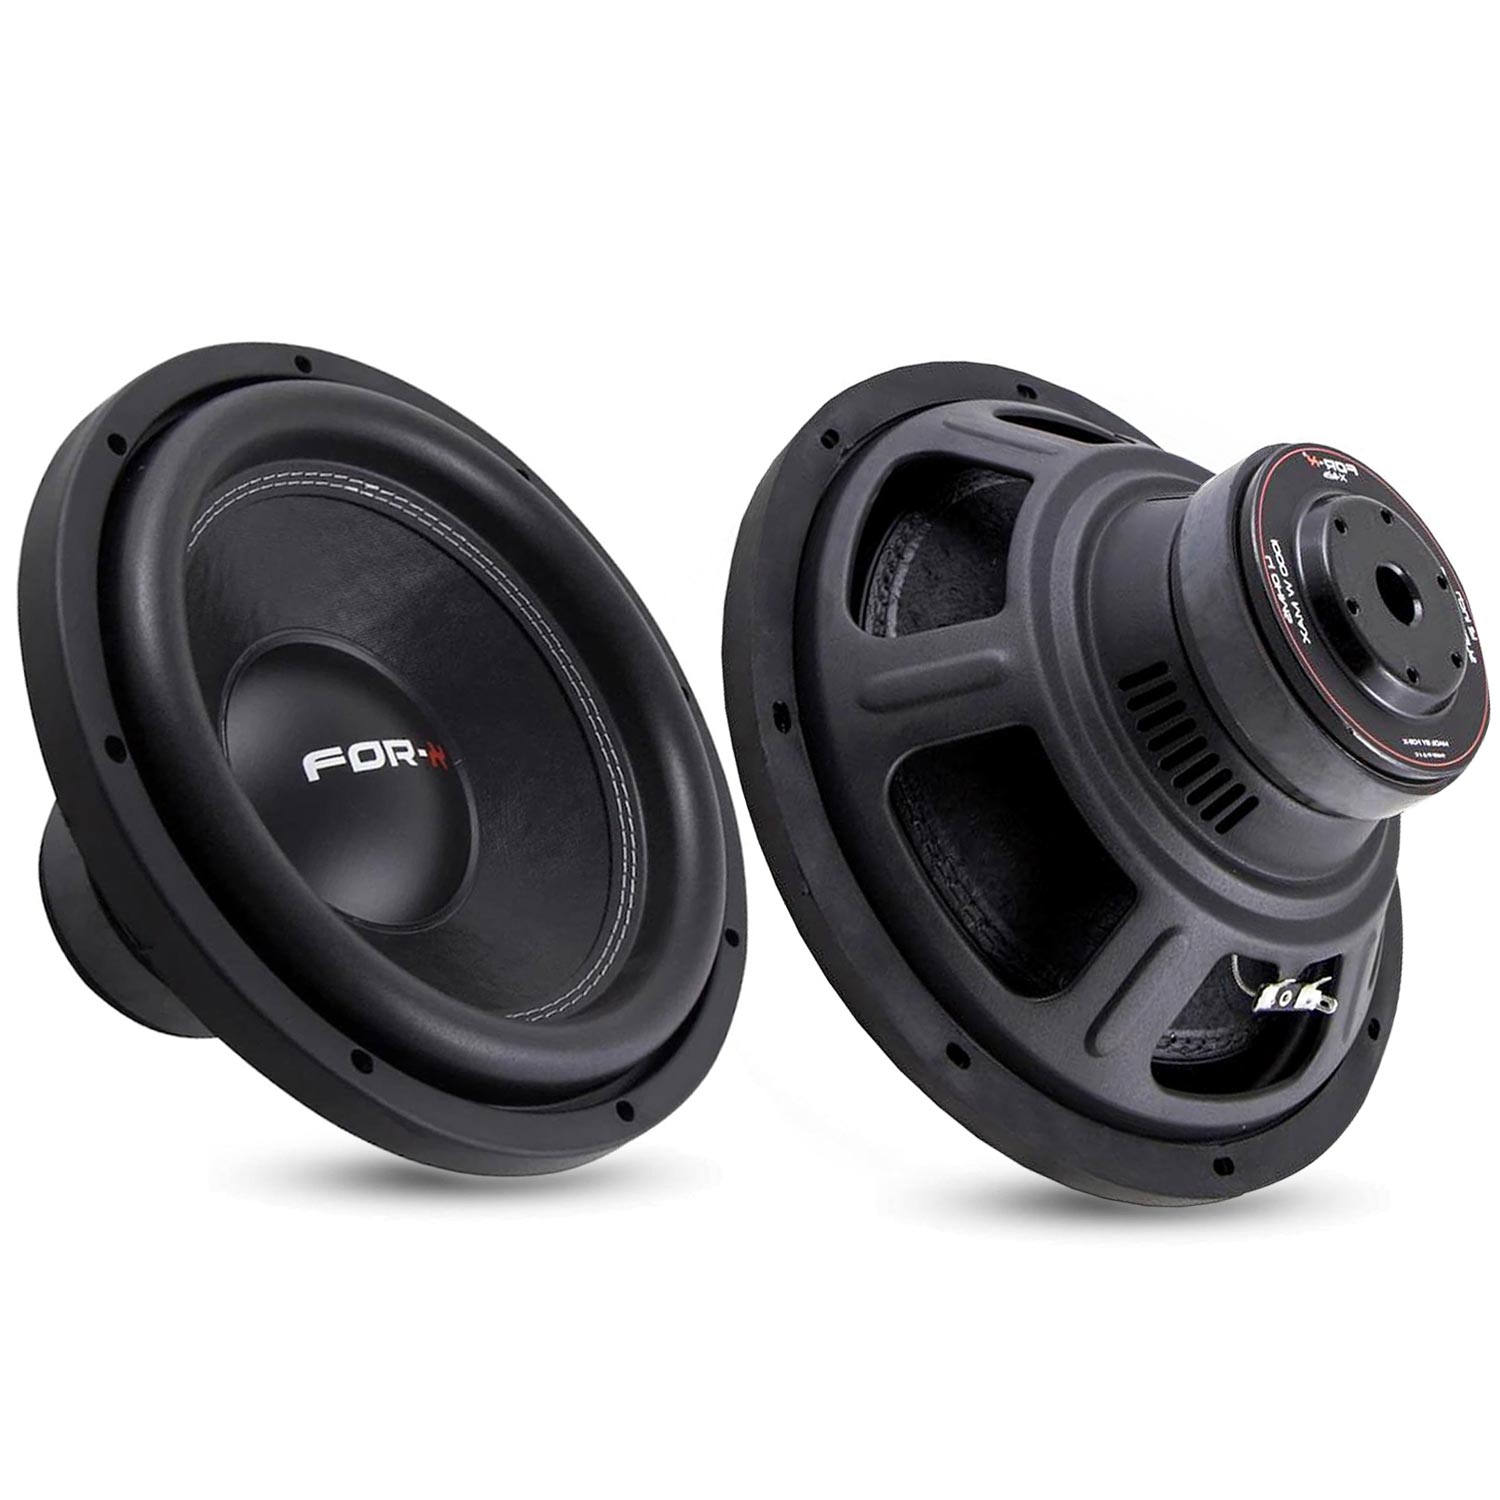 OTO BASS SUBWOOFER 30CM 1000W 1 ADET FOR-X X-112S